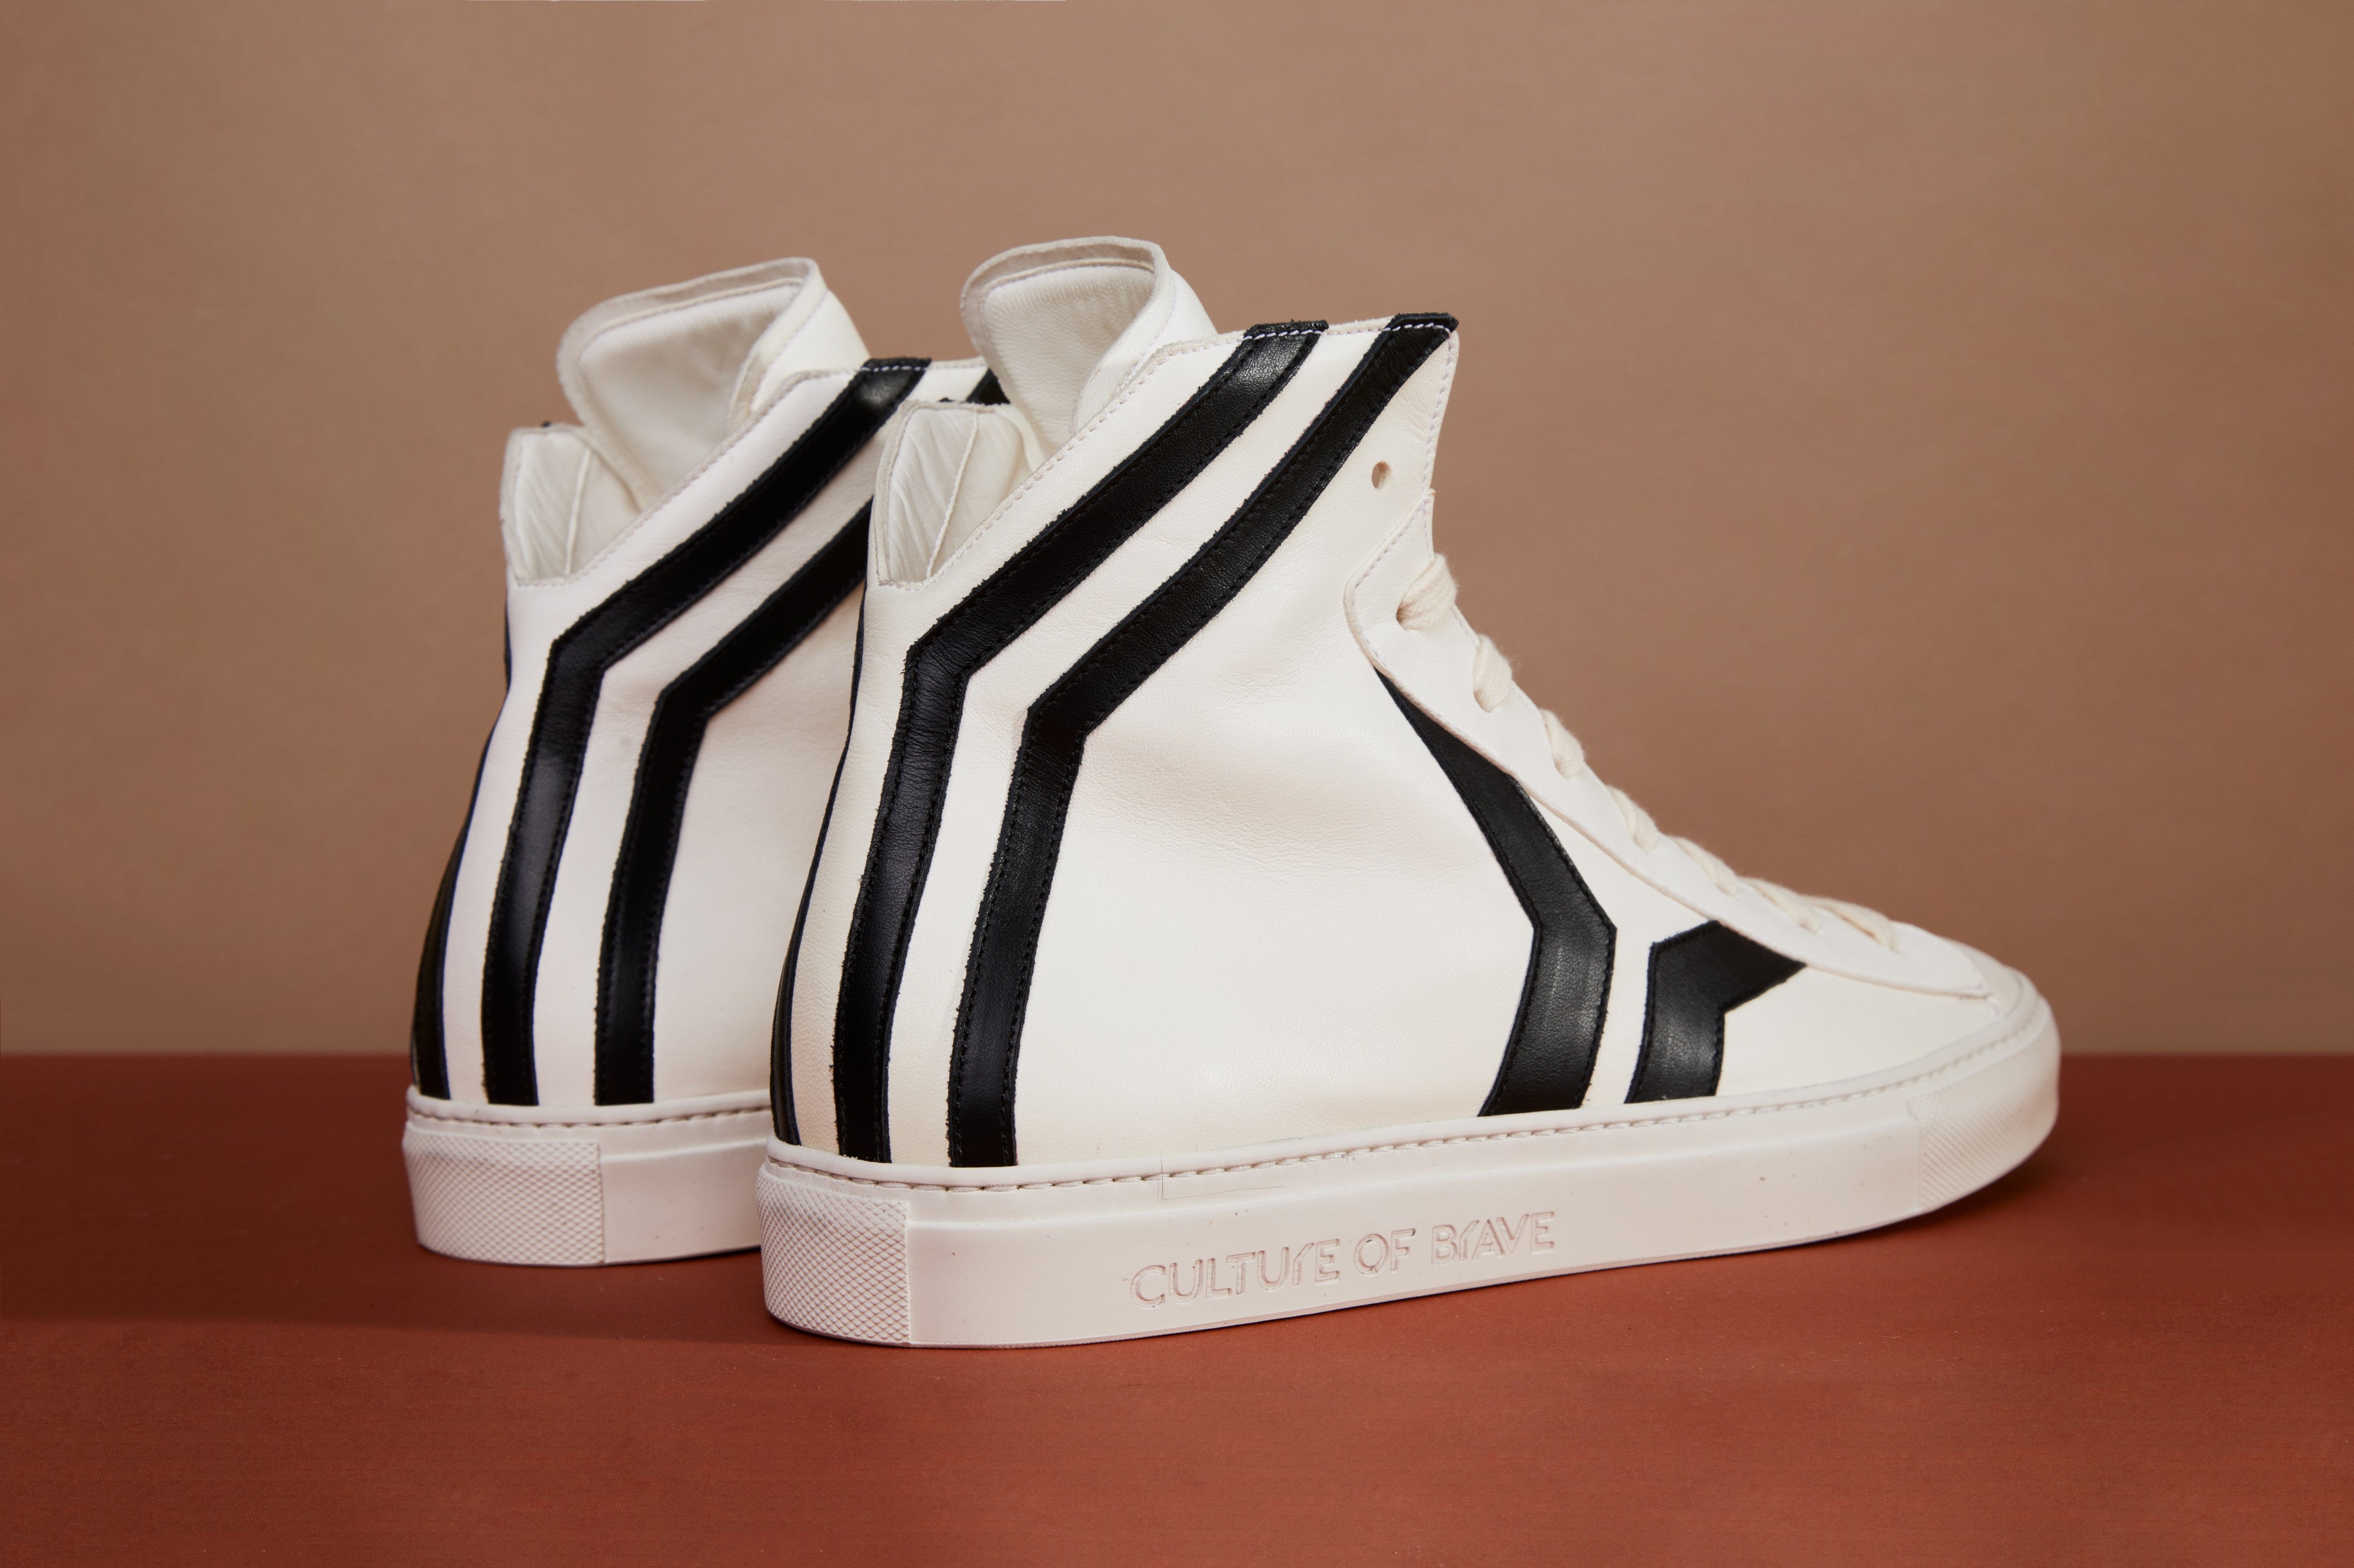 Resilient S15 Women White leather black wing mid cut